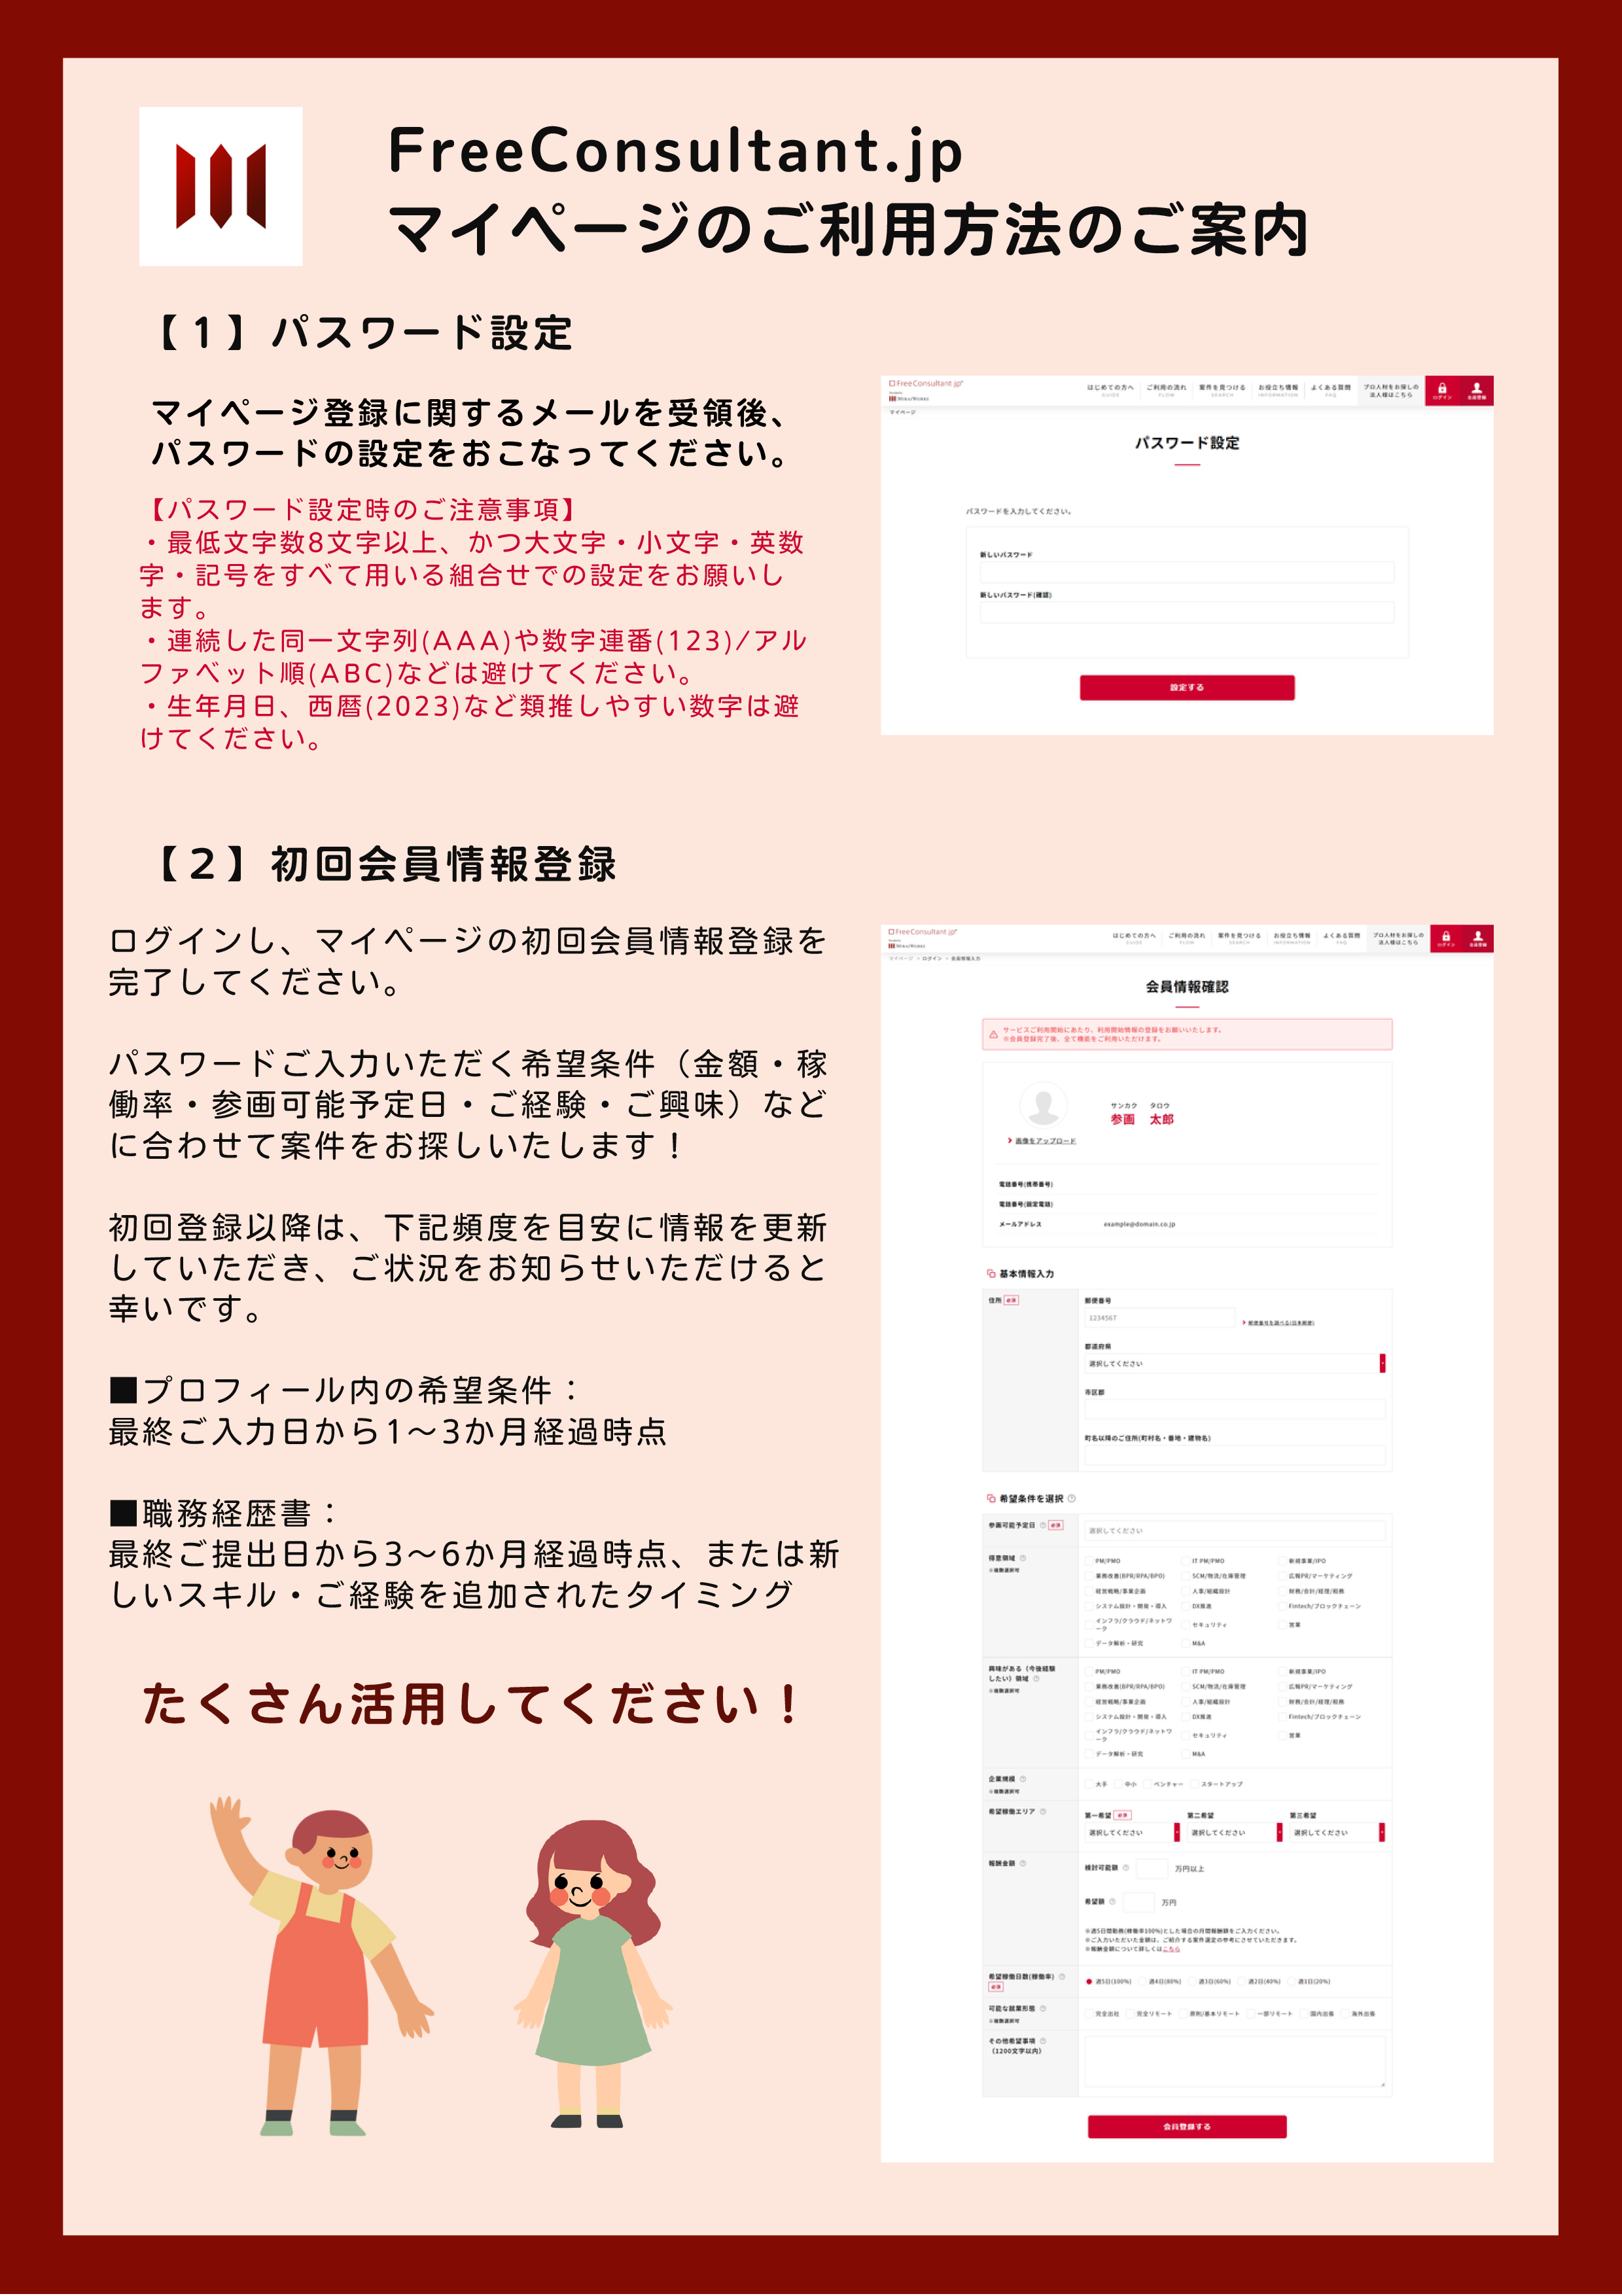 FreeConsultant.jp_flyer-1.png